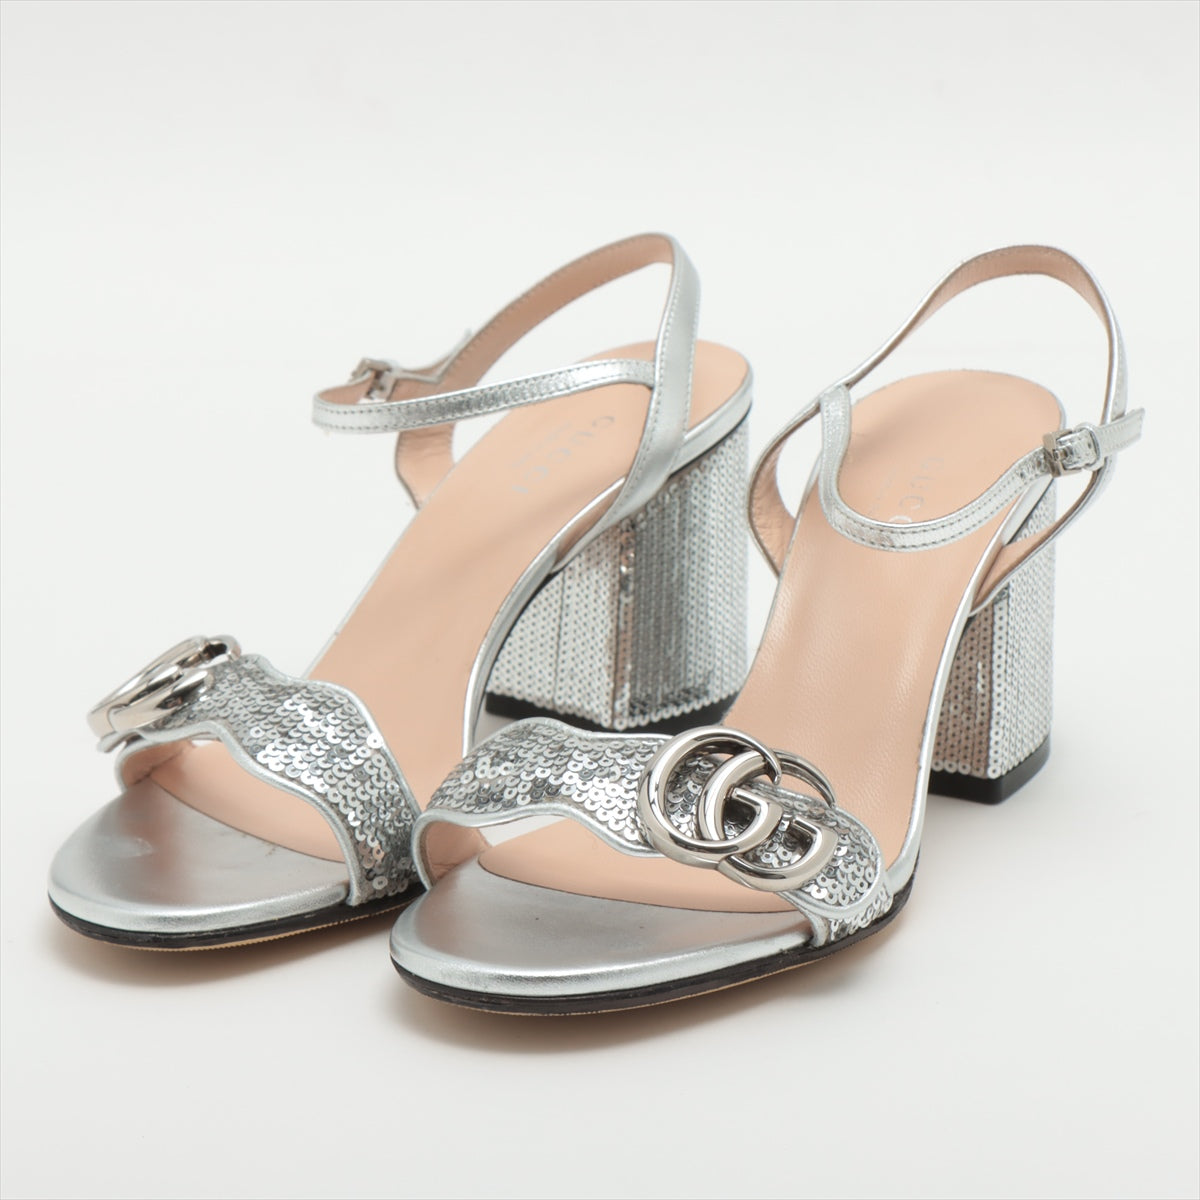 Gucci GG Marmont Leather Sandals 35 Ladies' Silver Sequins box There is a bag